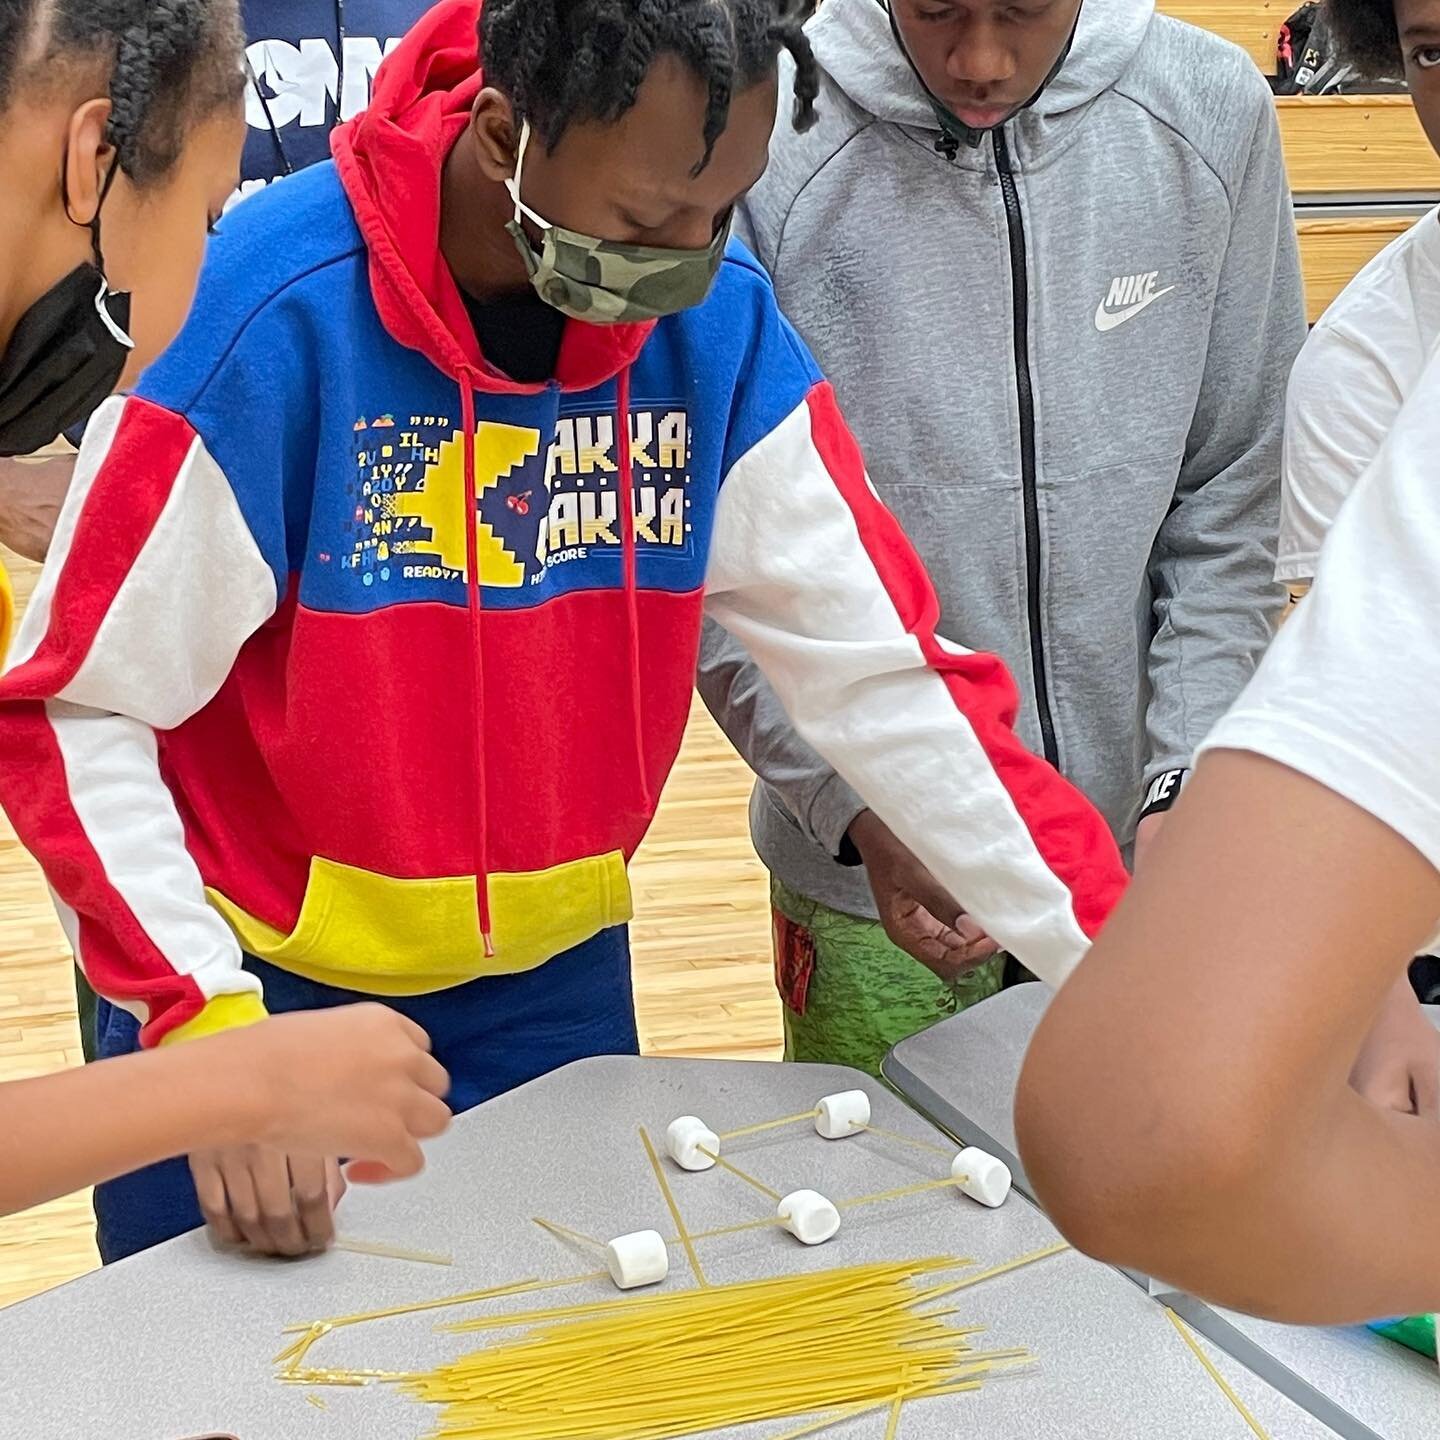 At Eagle Academy, students learned about composition by competing in a race to make the largest structure out of marshmallows and pasta #harrimanprograms #education #eagleacademy